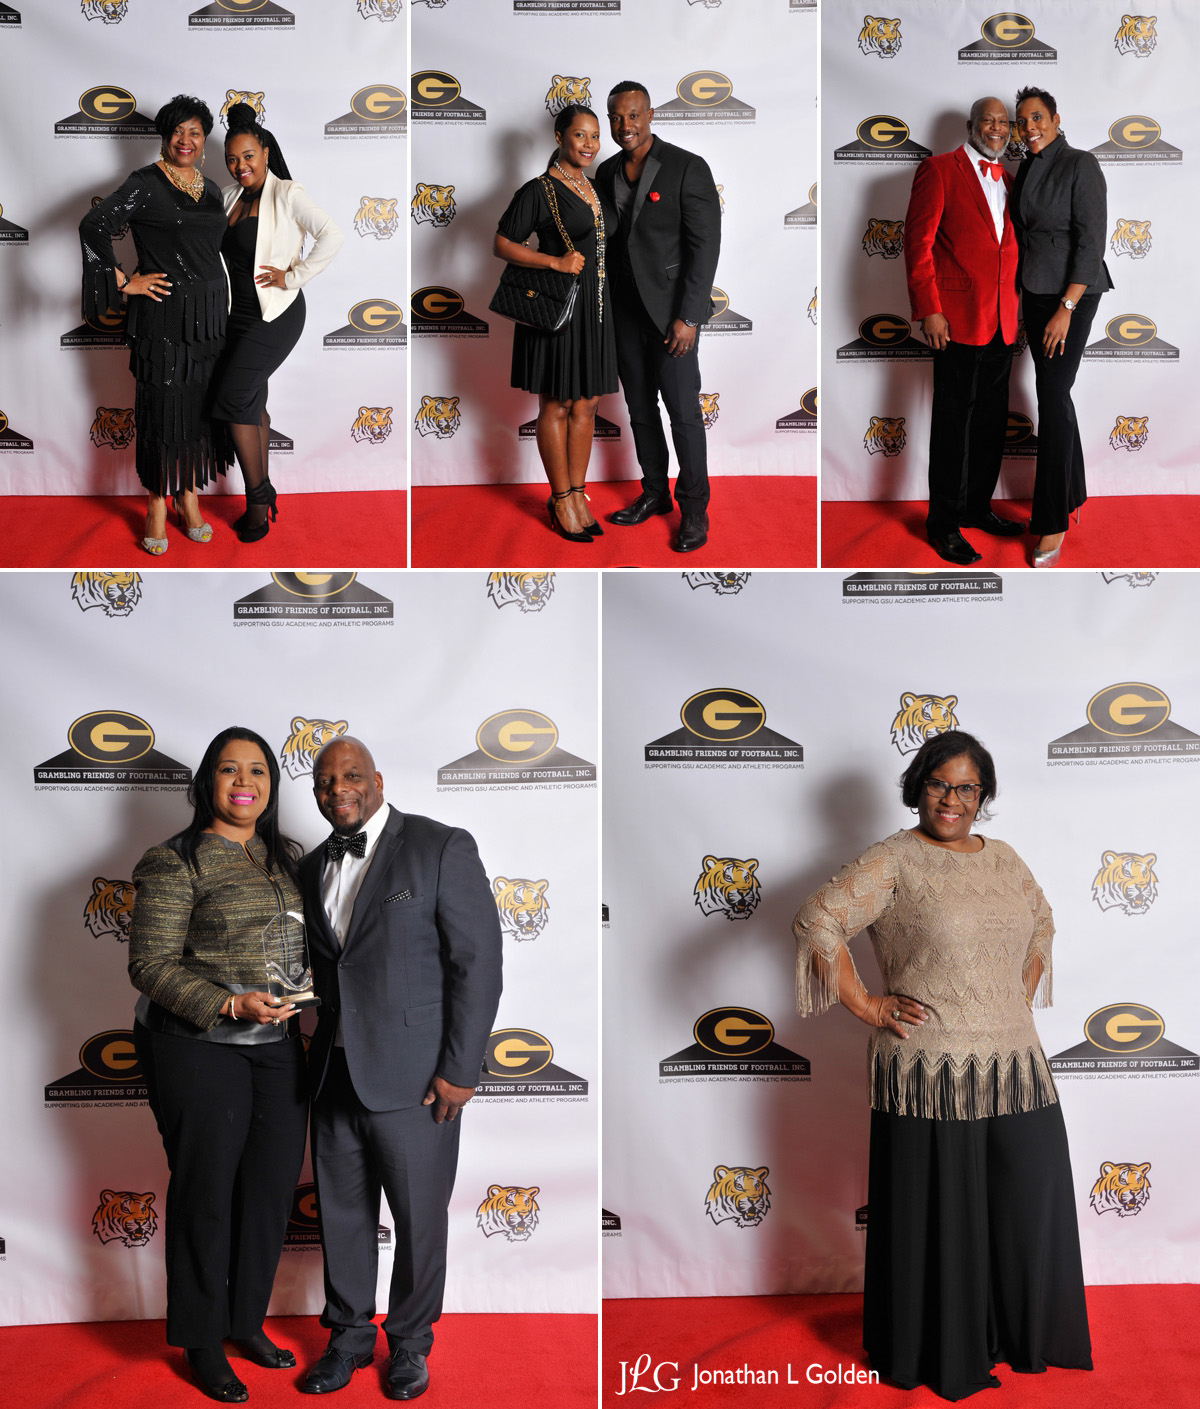 grambling-party-in-houston-2